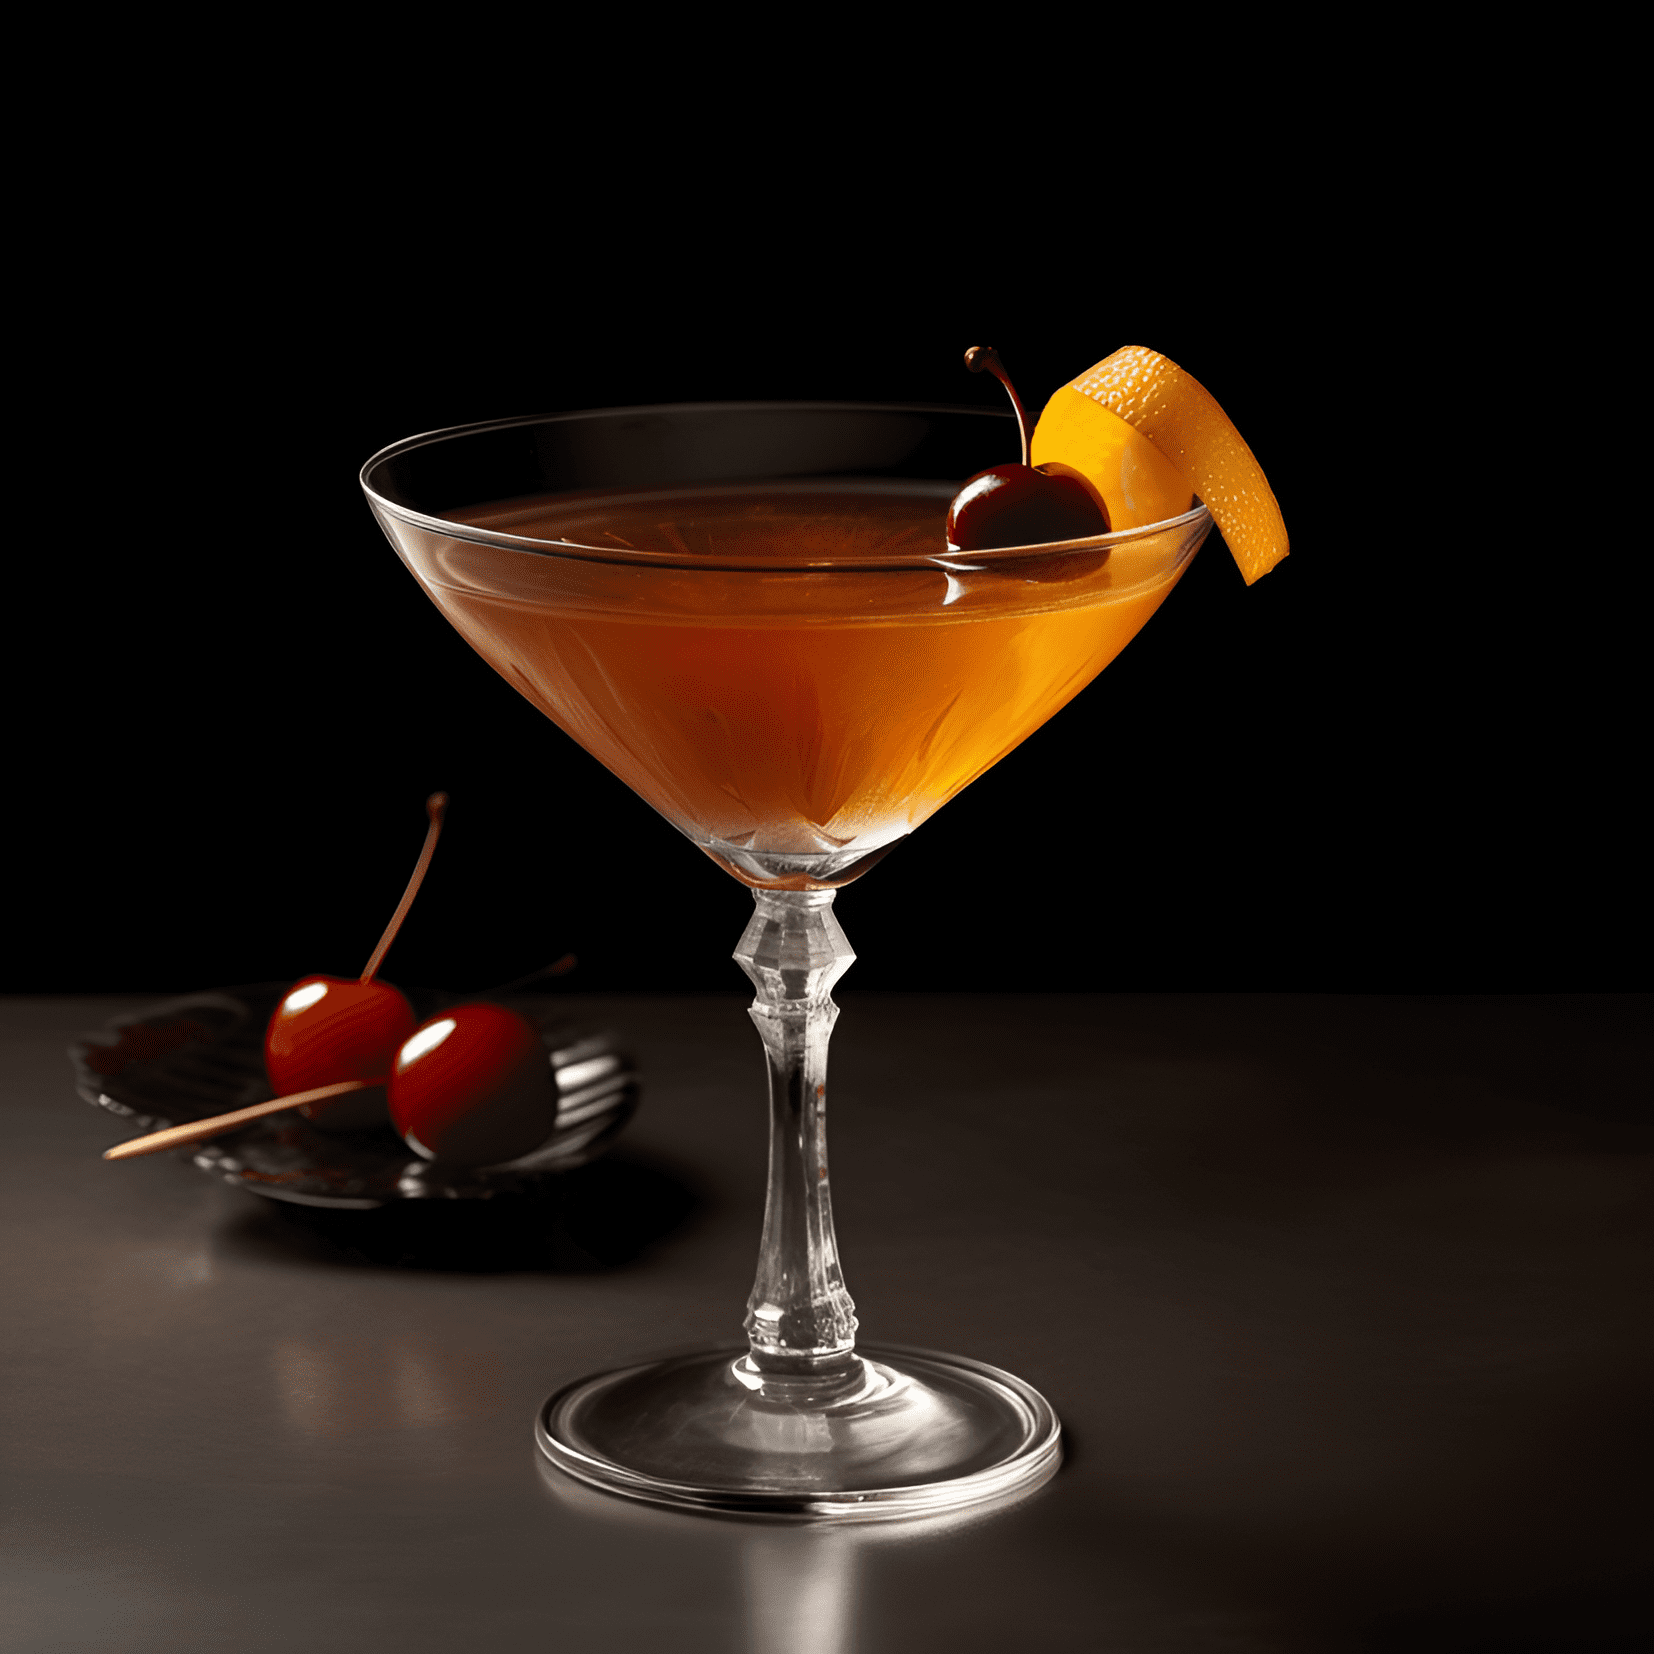 Harlem Cocktail Recipe - The Harlem cocktail offers a delightful balance of sweet and sour flavors, with a hint of bitterness. The combination of citrus and sugar creates a refreshing and zesty taste, while the whiskey adds warmth and depth. The overall experience is smooth, with a pleasant lingering aftertaste.